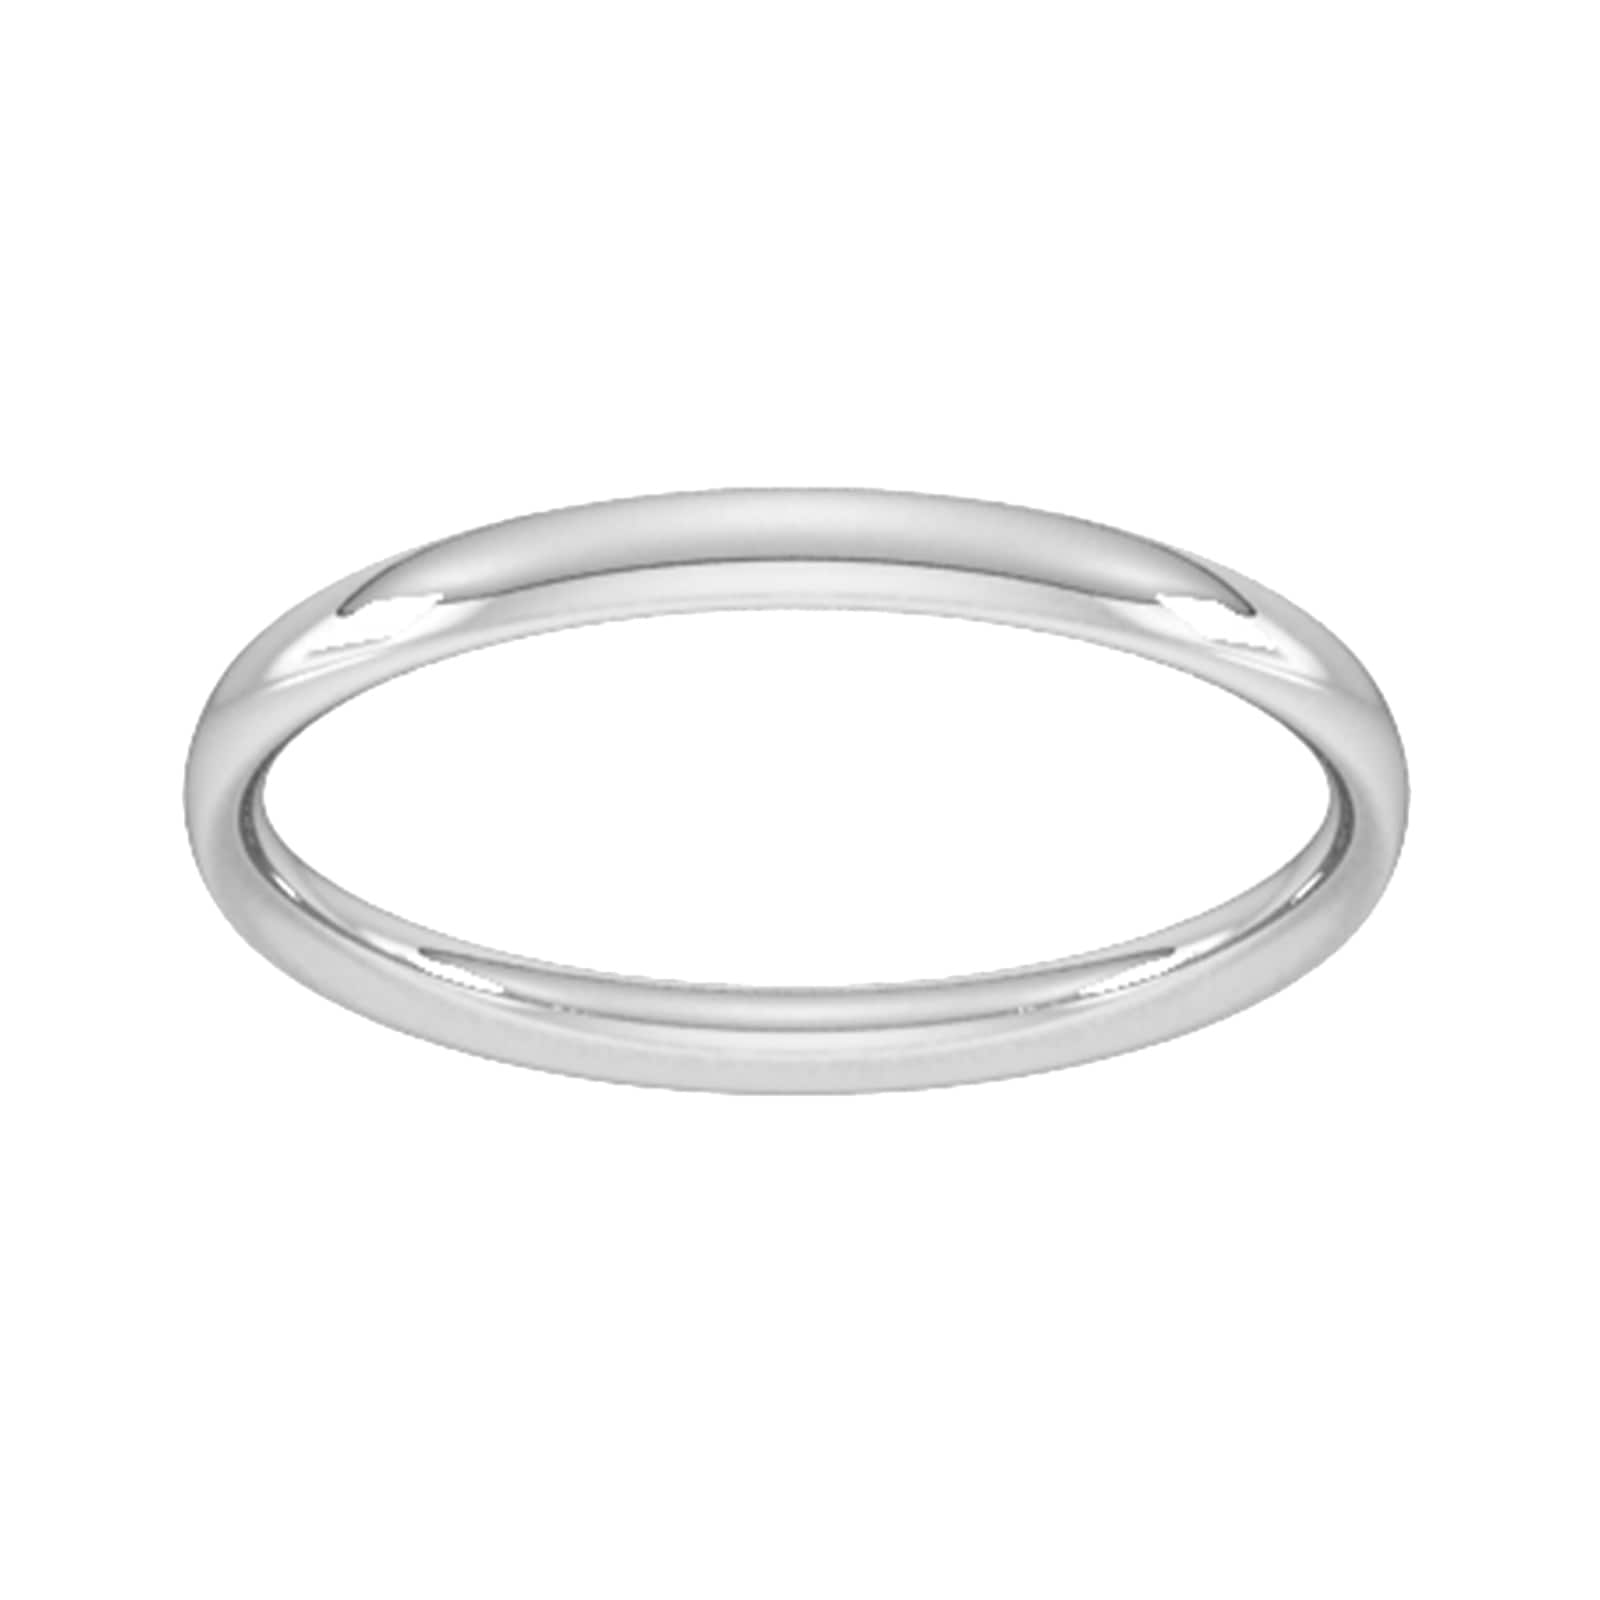 2mm Traditional Court Standard Wedding Ring In 9 Carat White Gold - Ring Size O.5